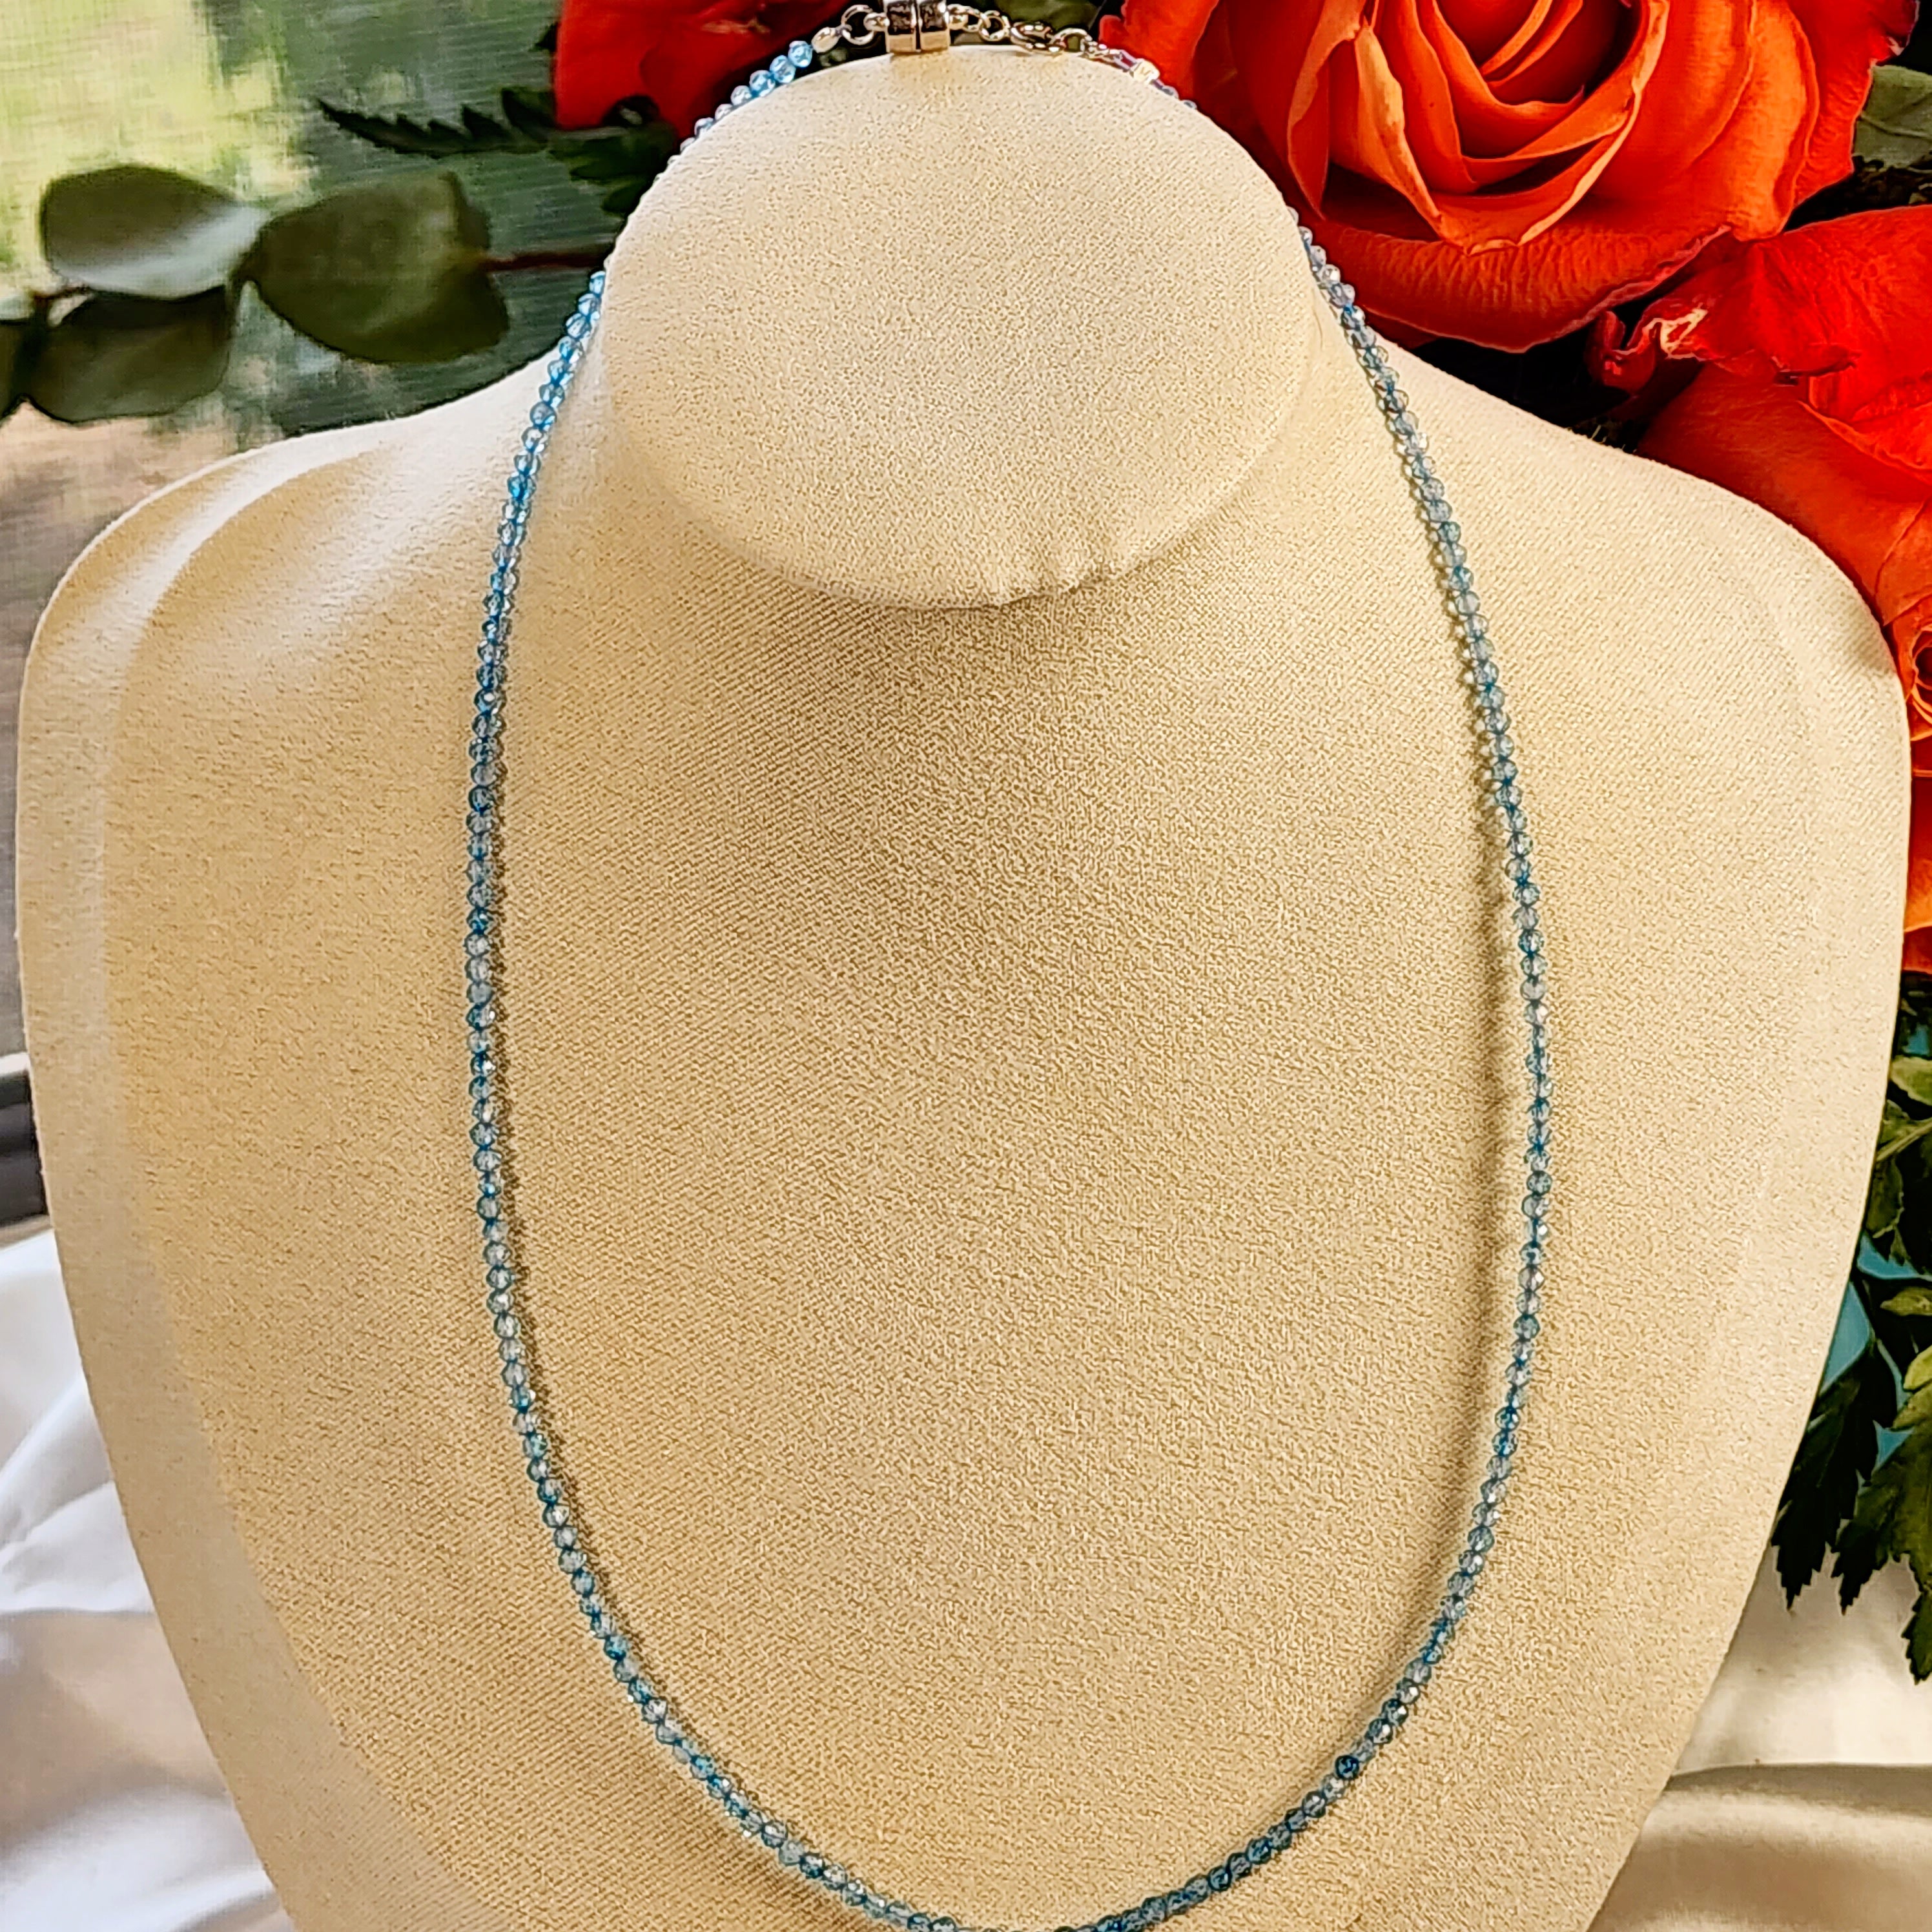 Blue Topaz Micro Faceted Choker/Layering Necklace for Mental Clarity and Wisdom